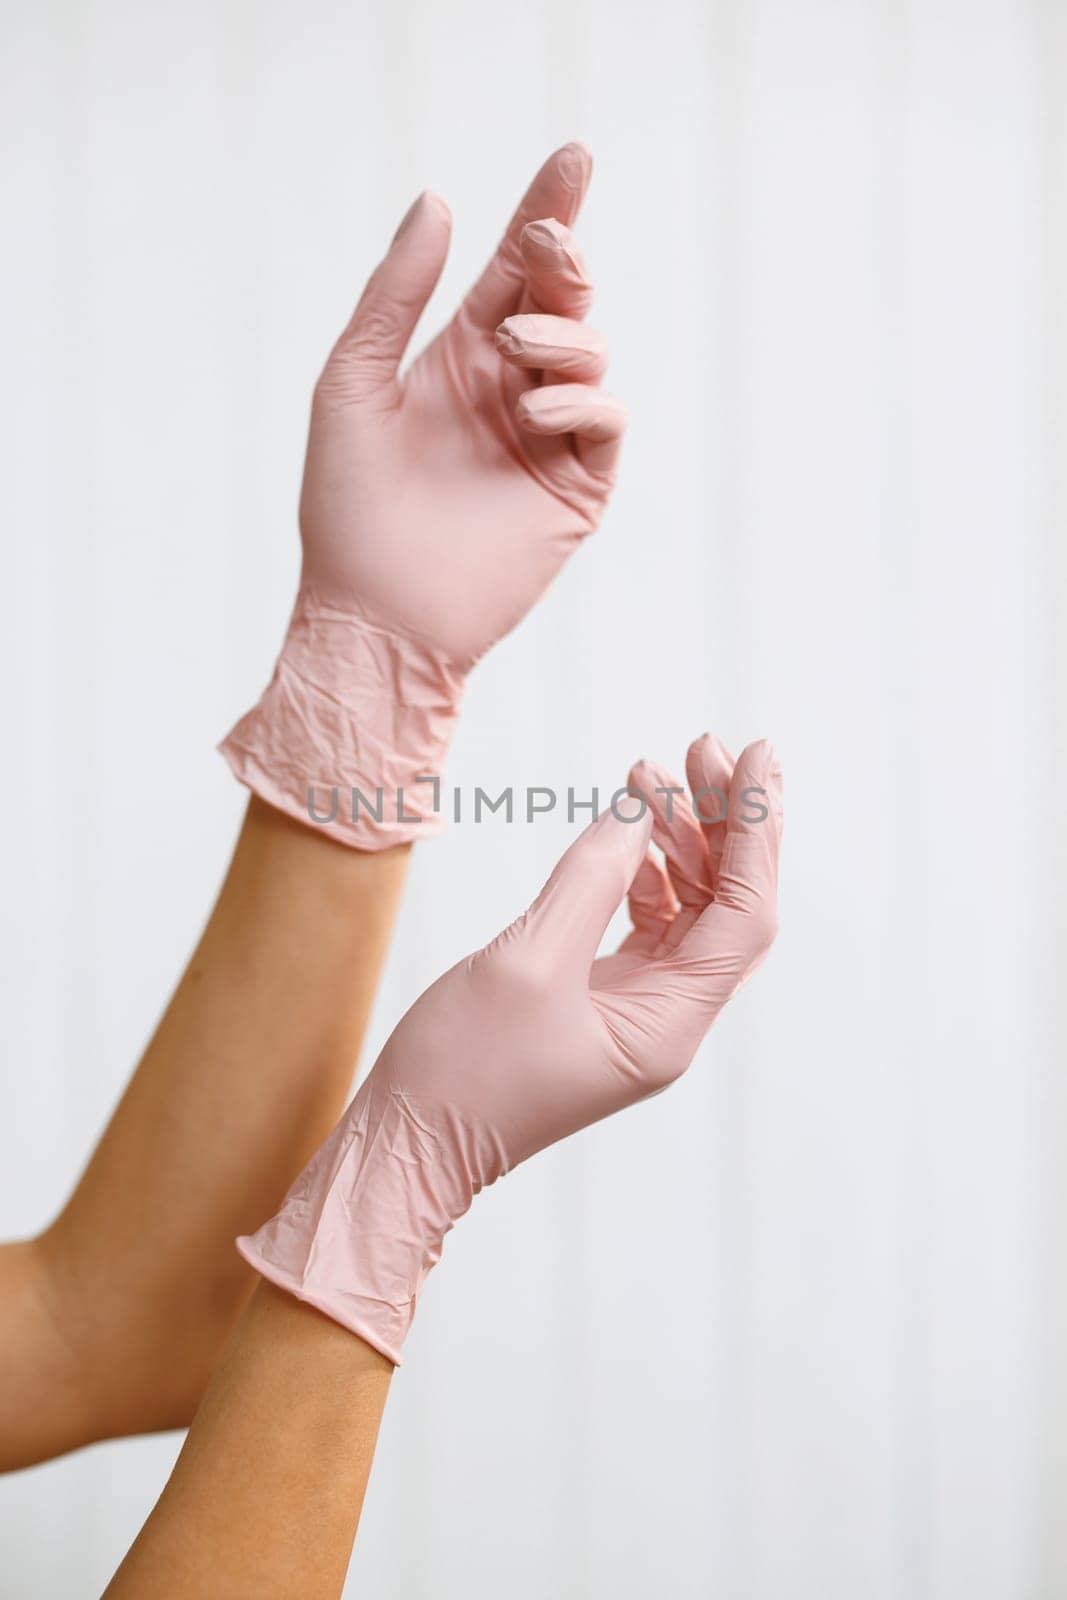 Two hands of a woman wearing gloves on a white background. Prevention of viral diseases. Hands wearing a pink latex glove.